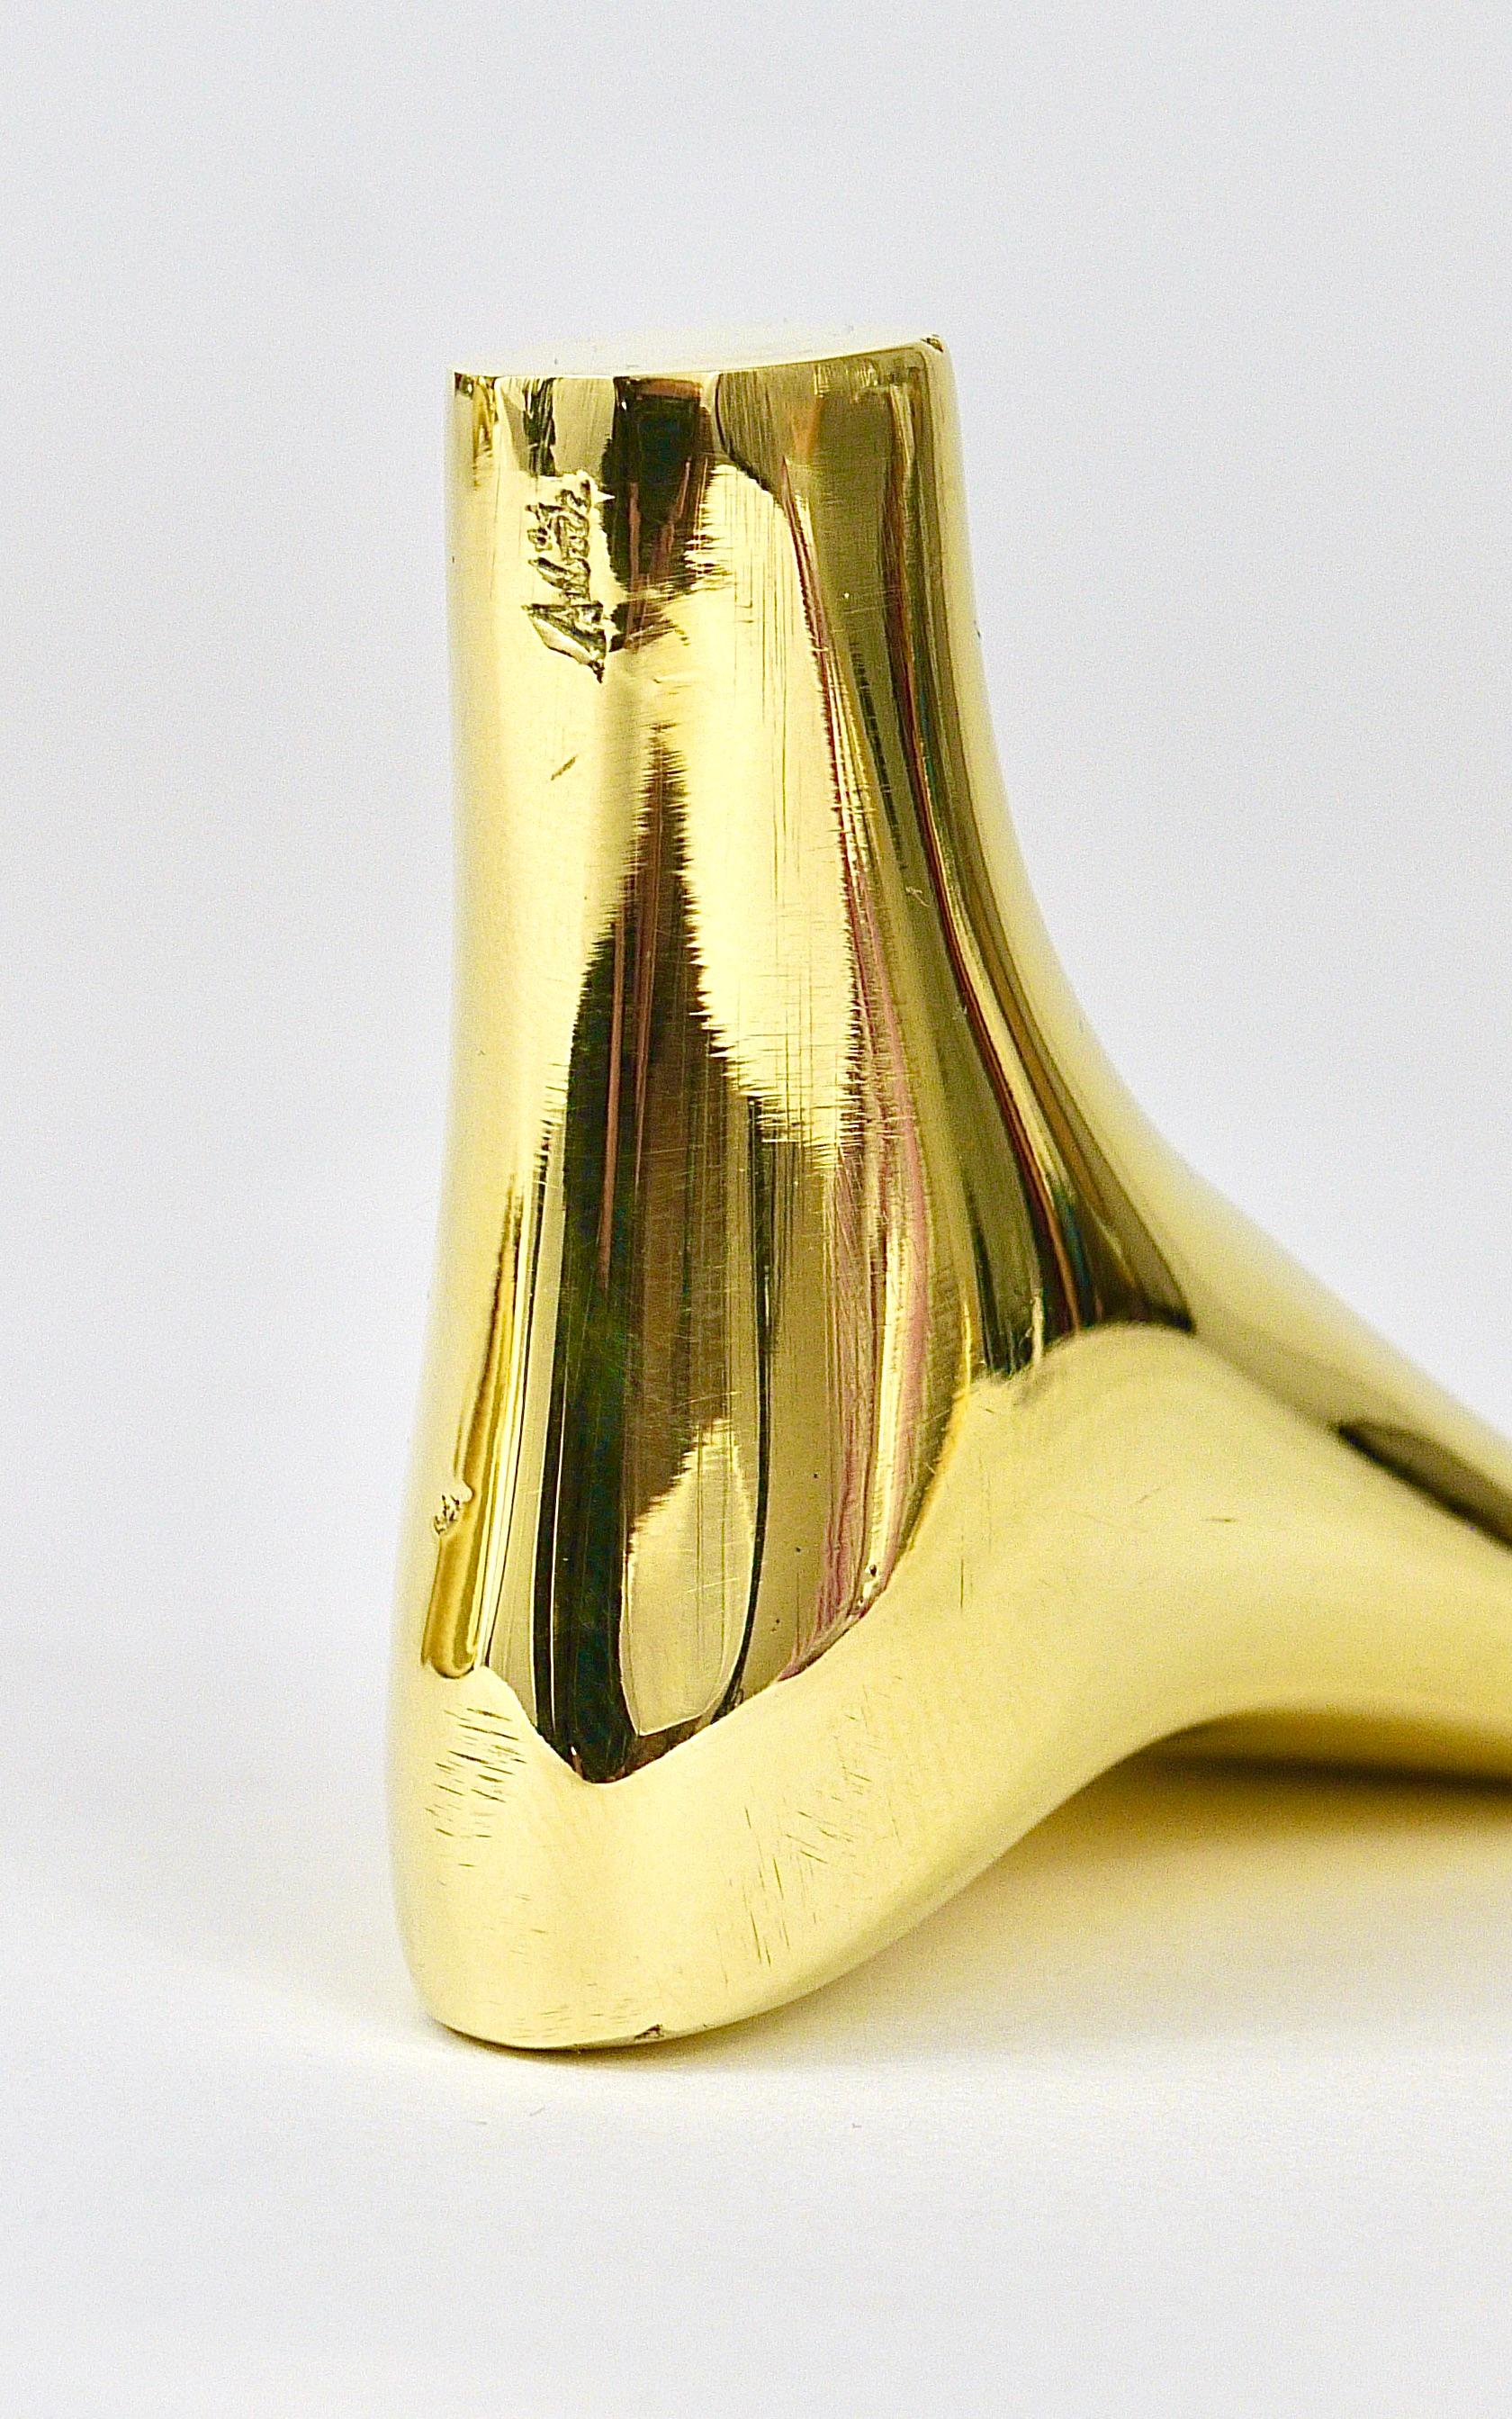 Signed Carl Auböck Midcentury Brass Foot Paperweight Handmade Sculpture For Sale 8